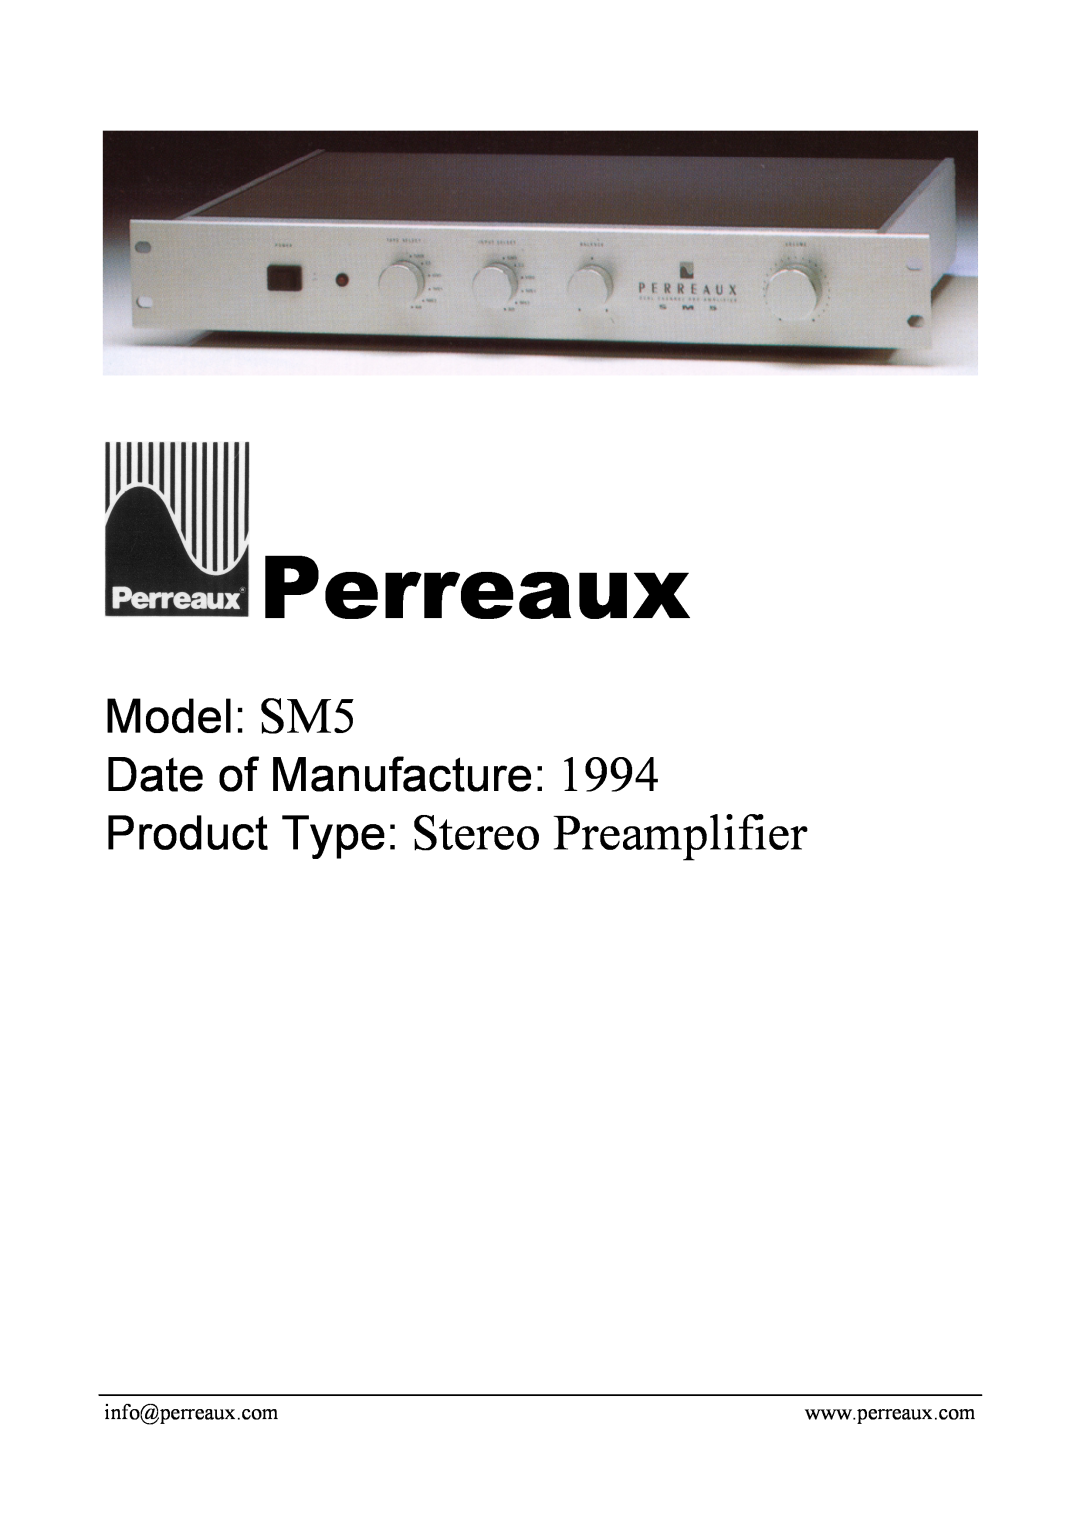 Perreaux manual Perreaux, Product Type Stereo Preamplifier, Model SM5 Date of Manufacture 